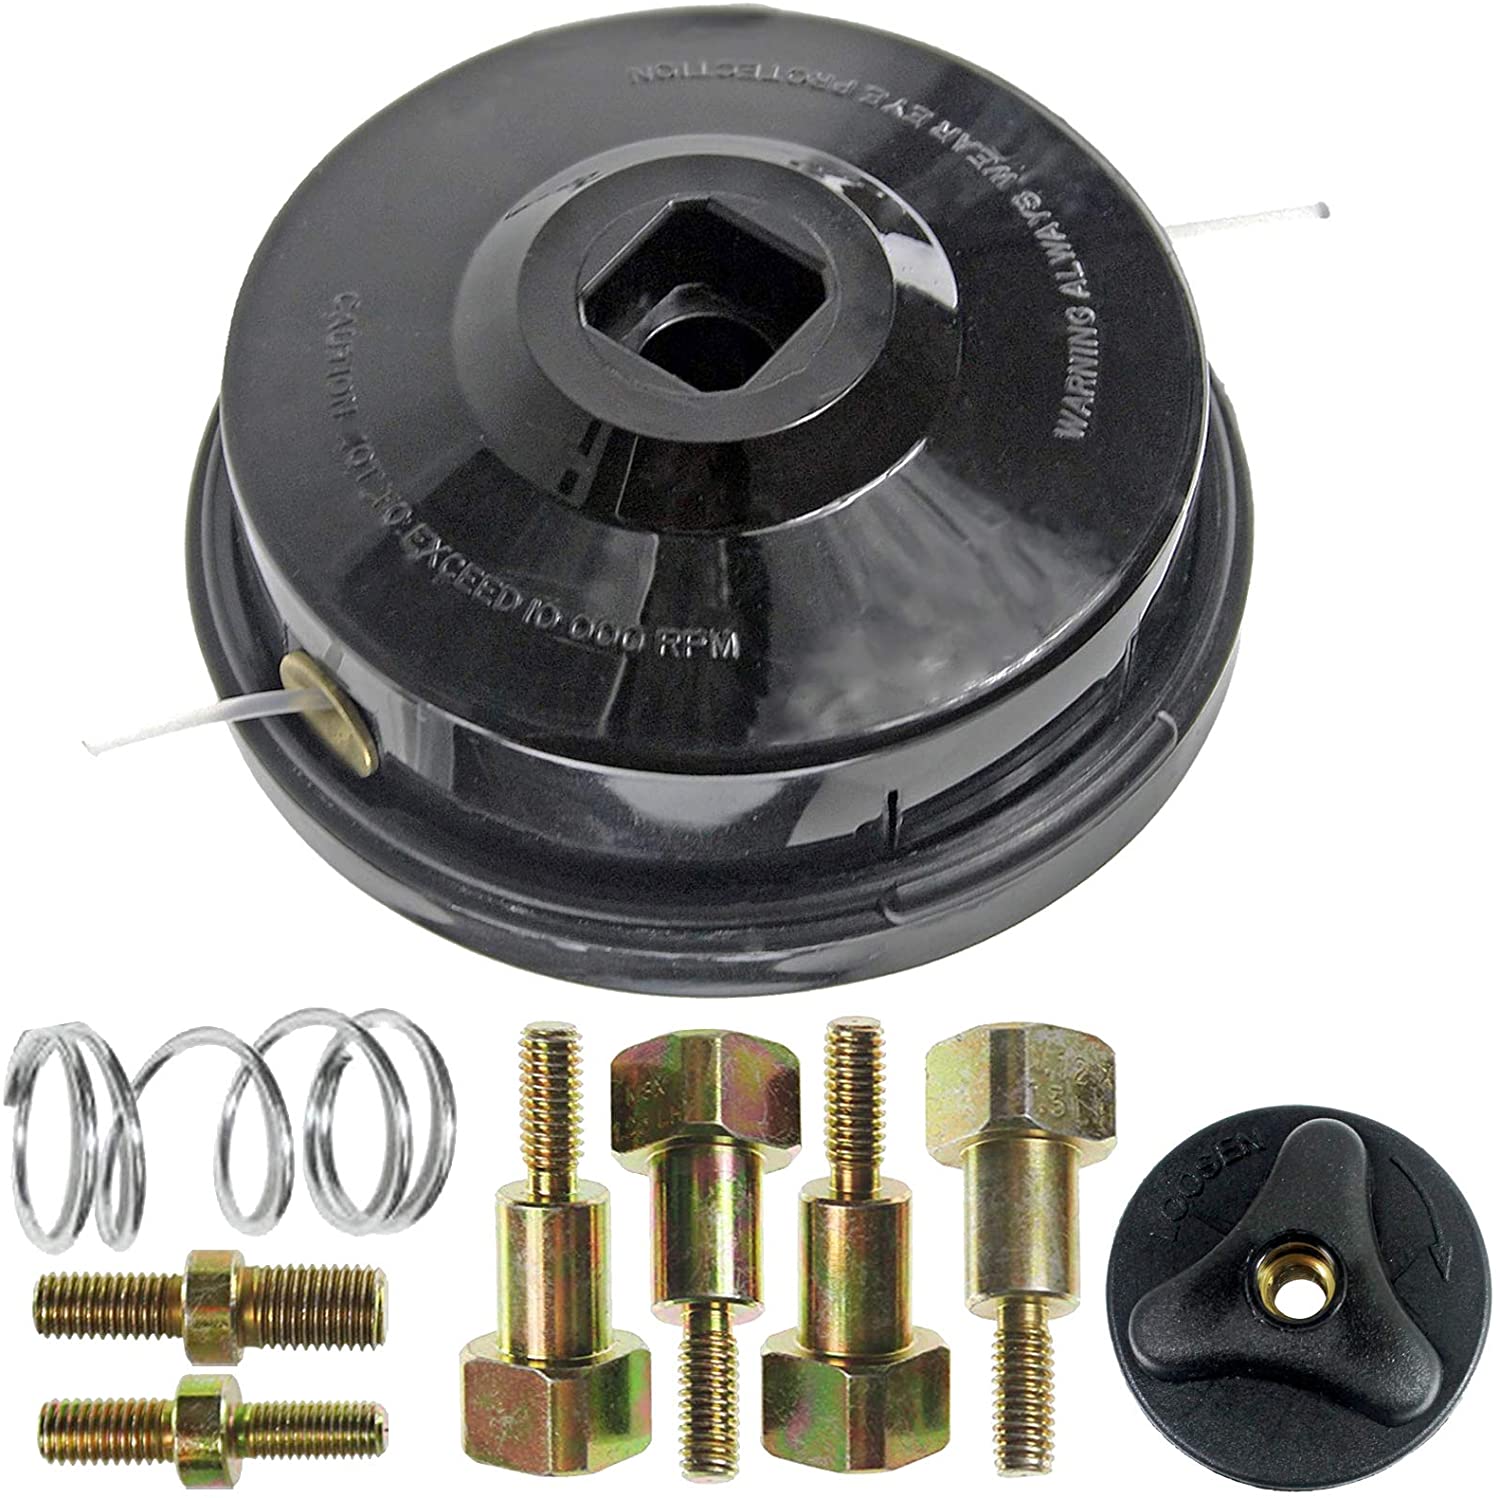 Dual Line Manual Feed Head with Bolts for TANAKA Strimmer/Trimmer/Brushcutter